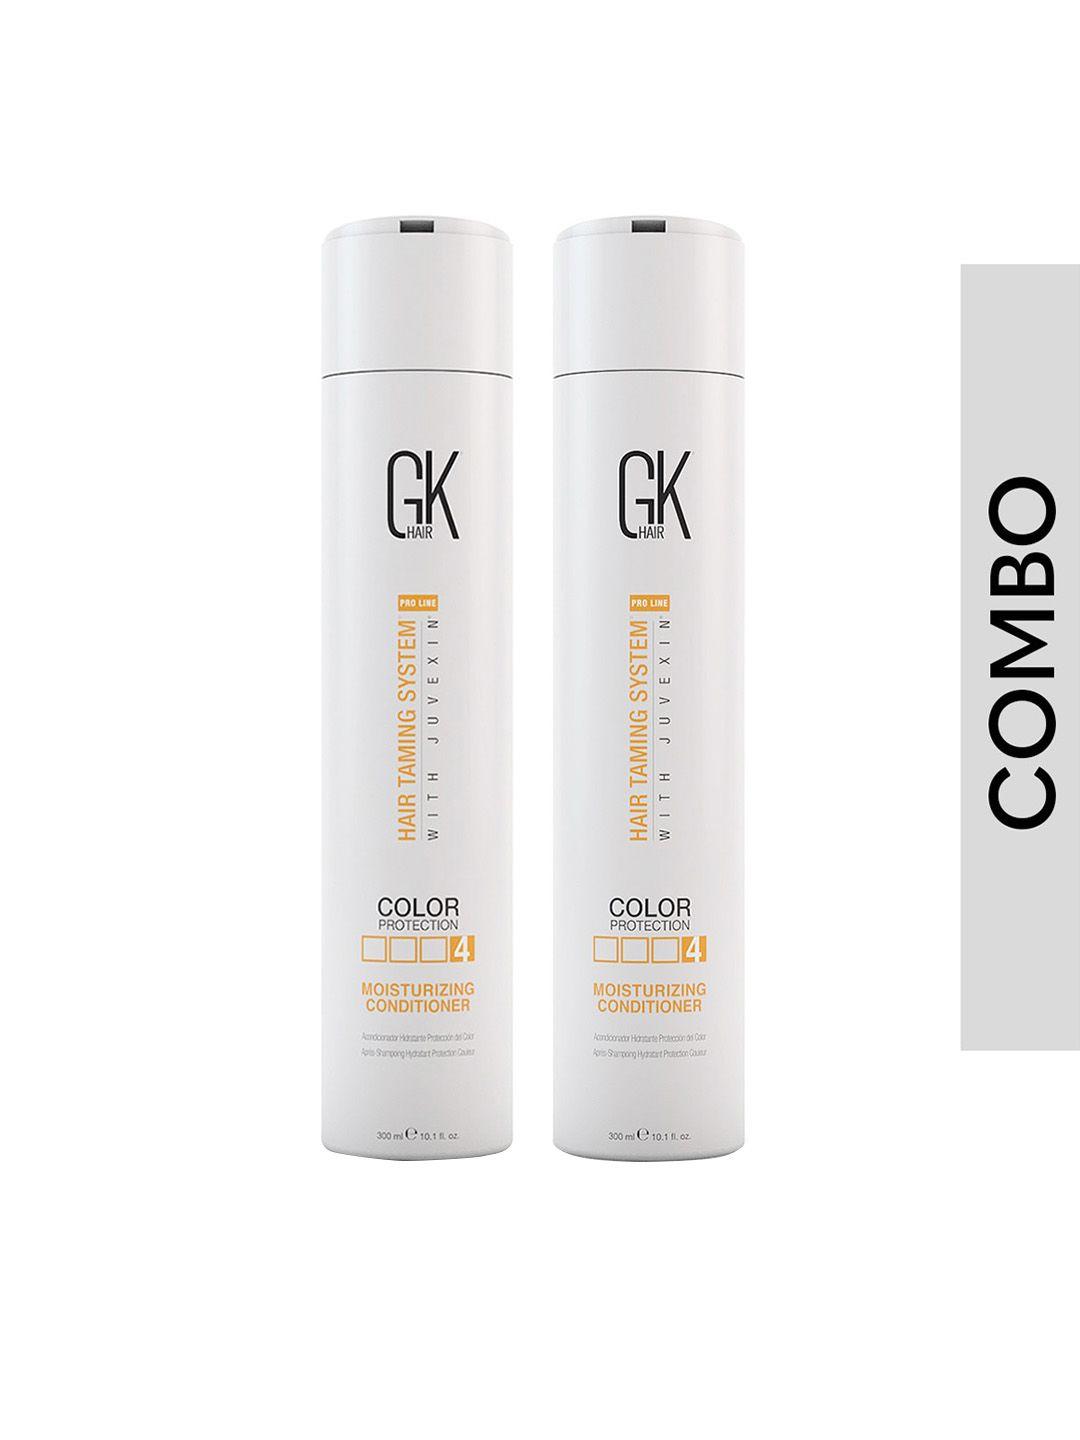 gk hair set of 2 hair taming system moisturizing conditioner with juvenix - 300 ml each